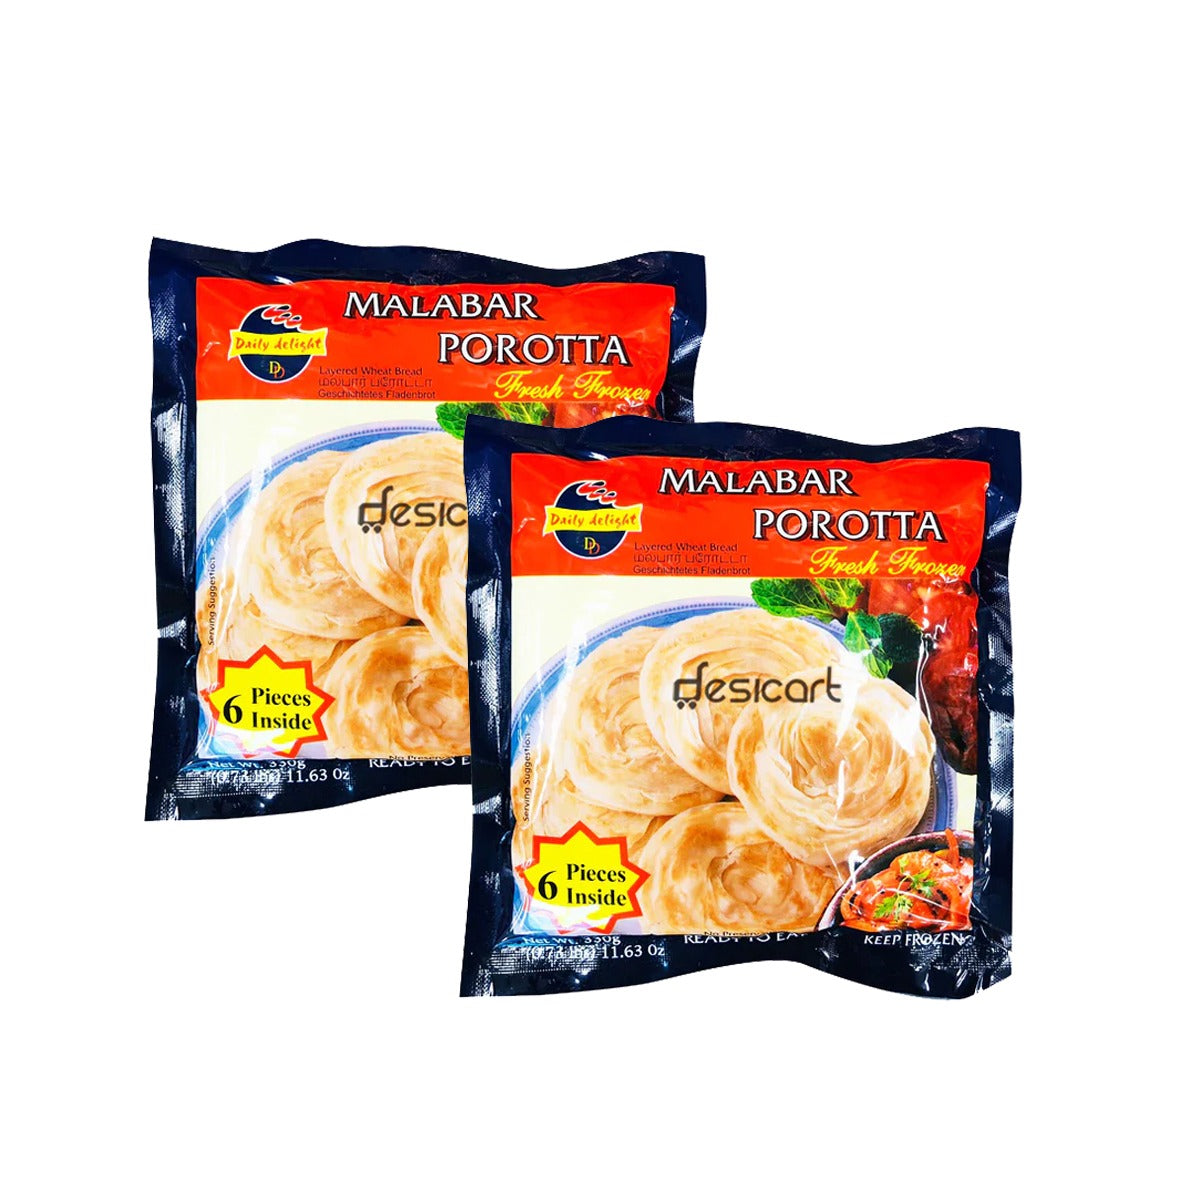 DAILY DELIGHT MALABAR POROTTA 330G(PACK OF 2)